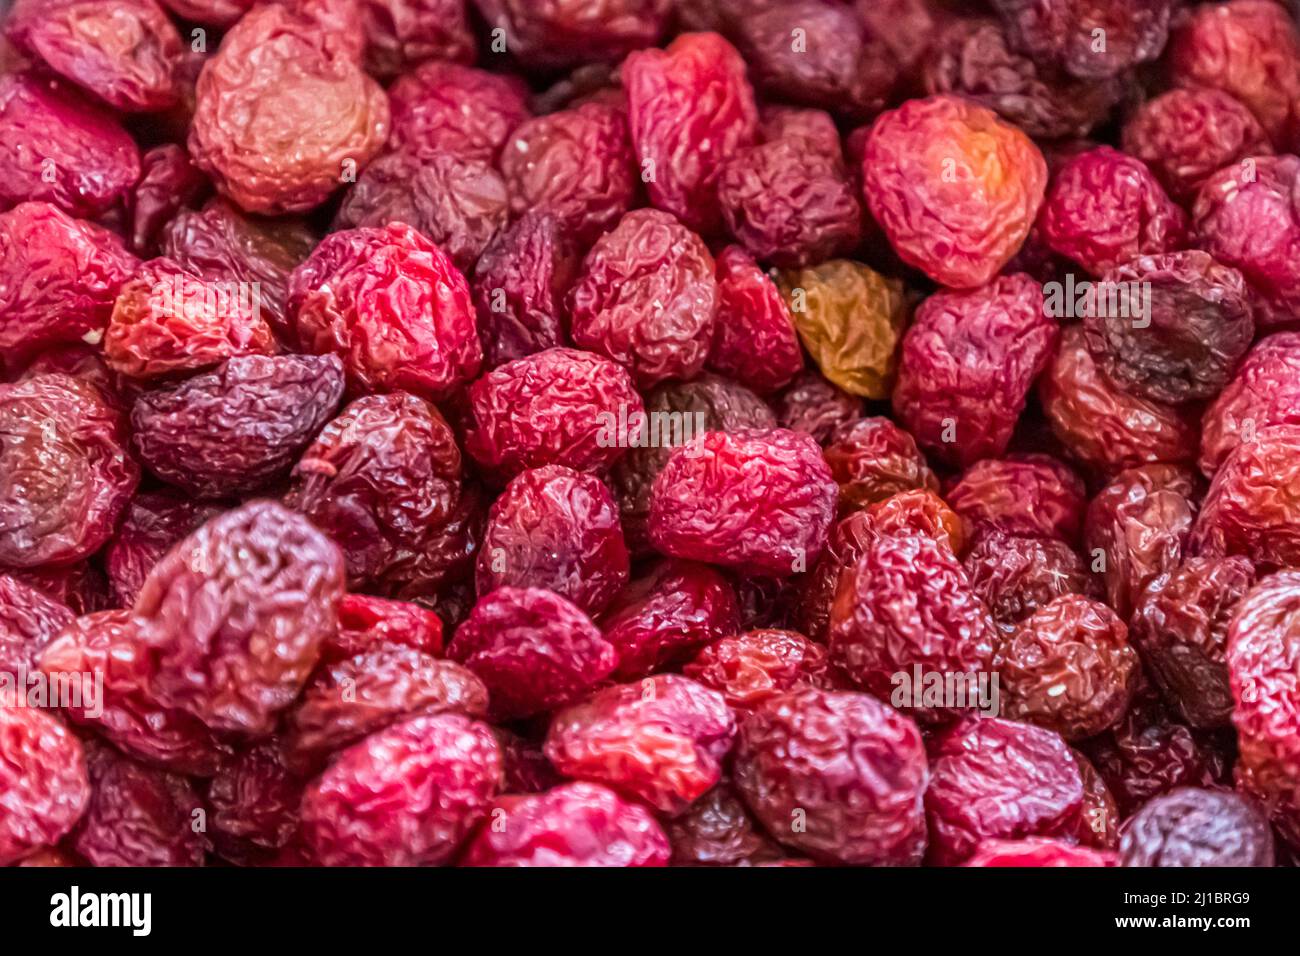 Turkish delight at the market of Famagusta, Turkish Republic of Northern Cyprus (TRNC) Stock Photo